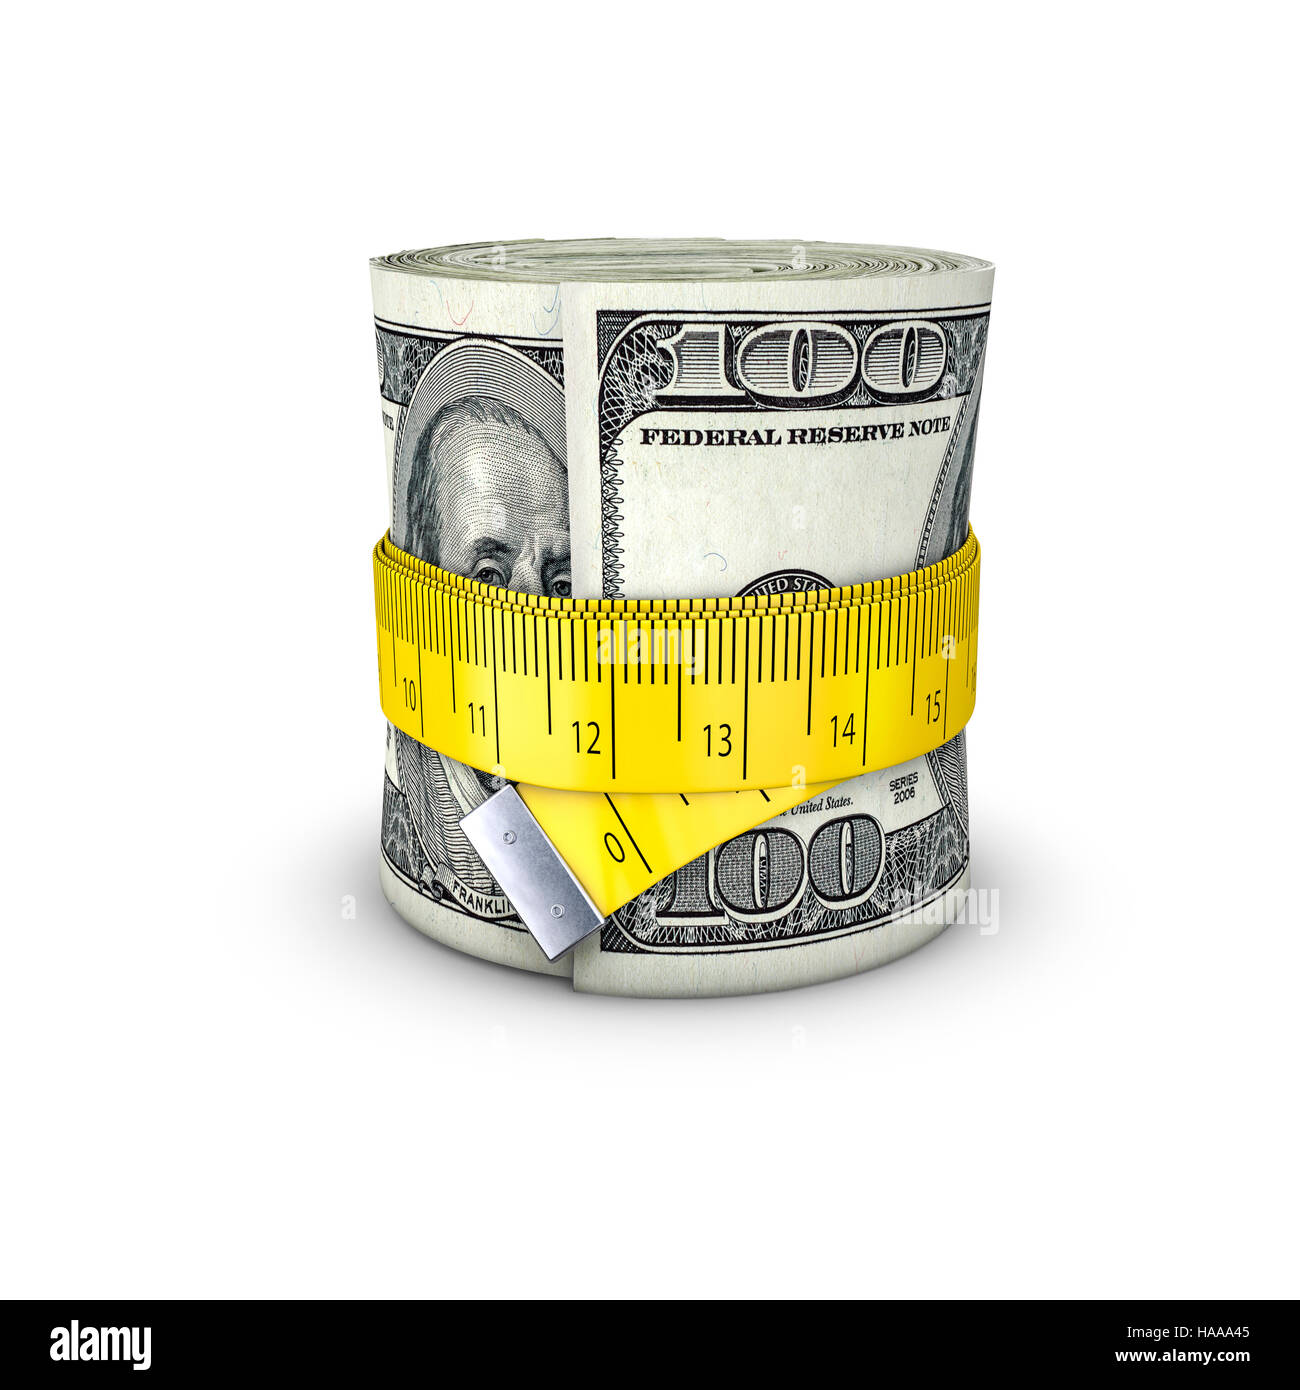 Tape measure dollars / 3D illustration of measuring tape tightening around roll of bank notes Stock Photo